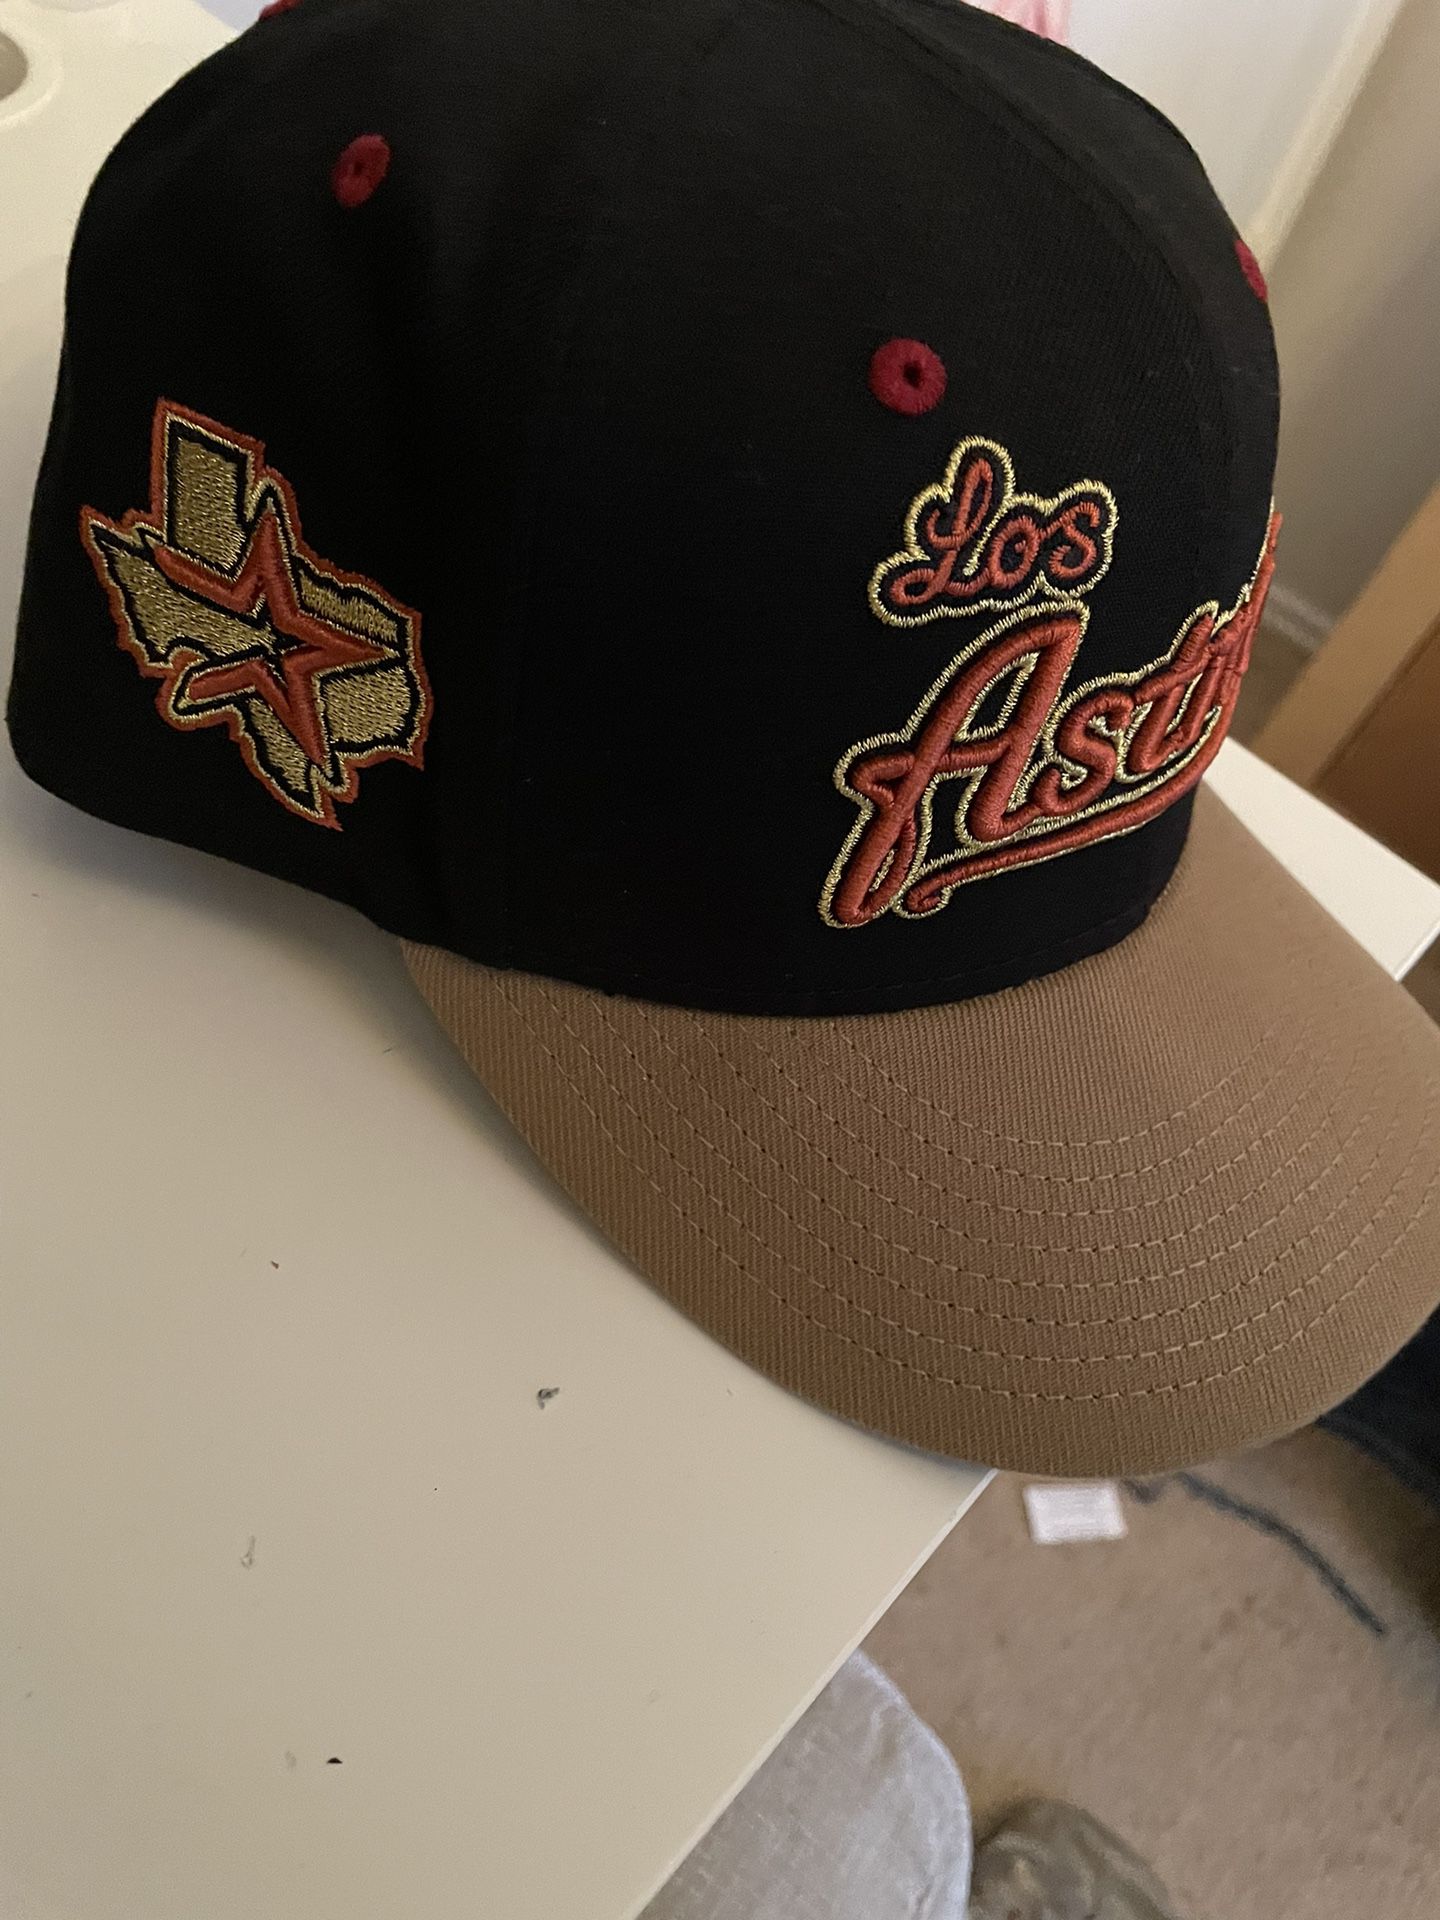 Astros fitted hat